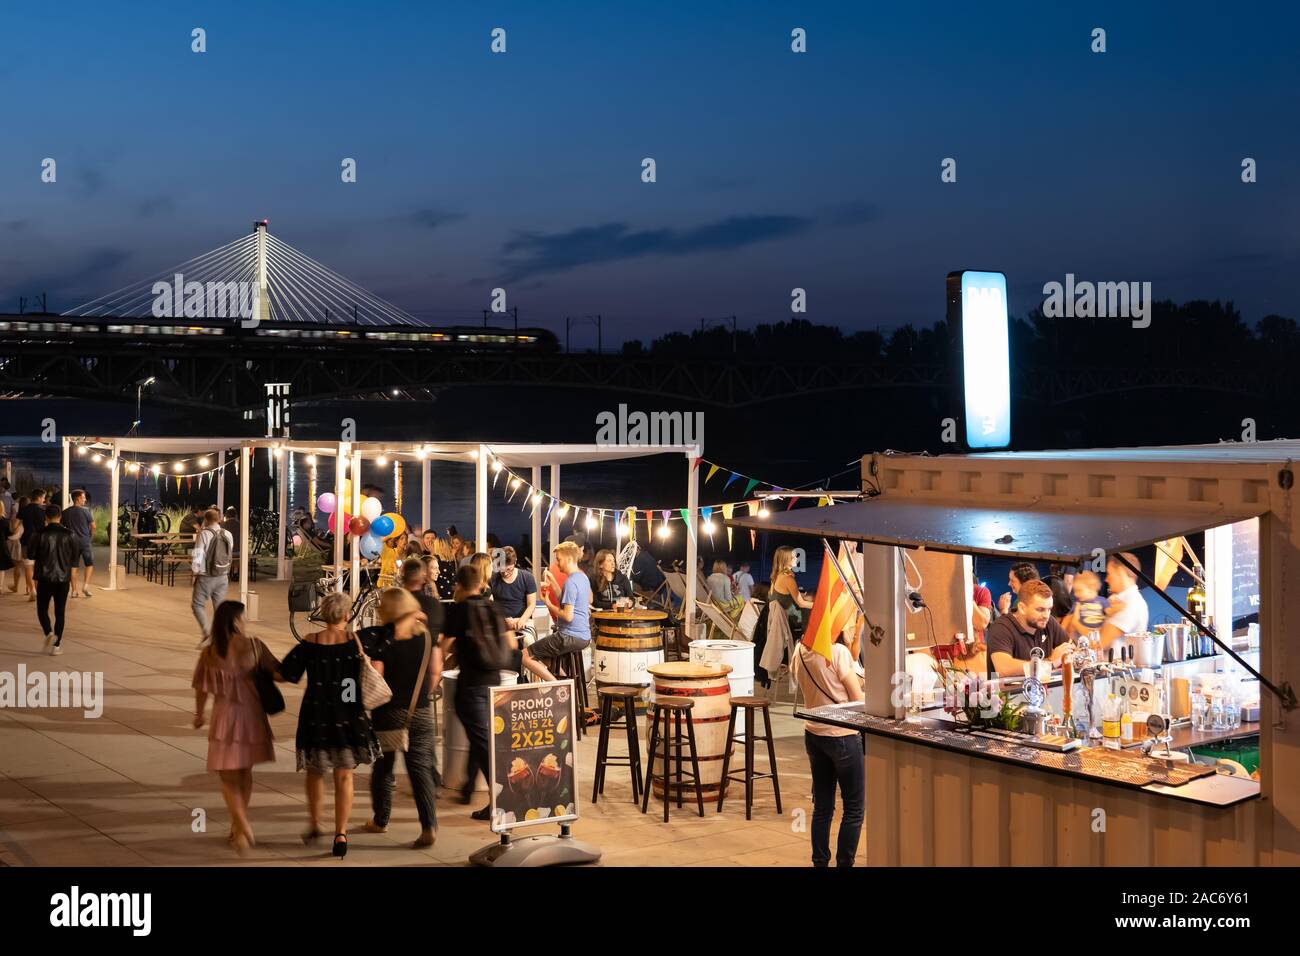 People at cafe restaurant on Vistula River Boulevards at night in city of Warsaw in Poland Stock Photo